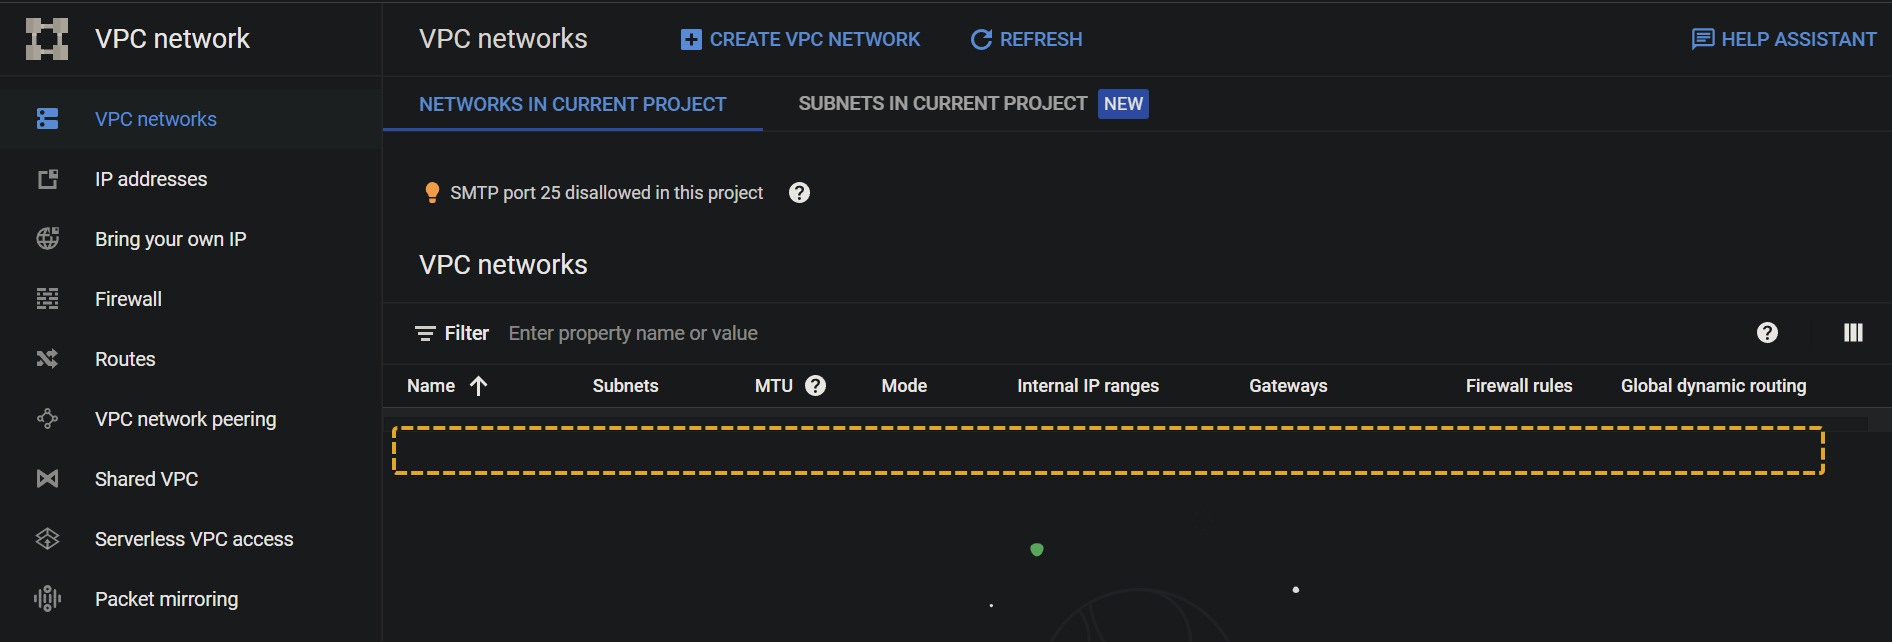 Verifying the default VPC network has been deleted